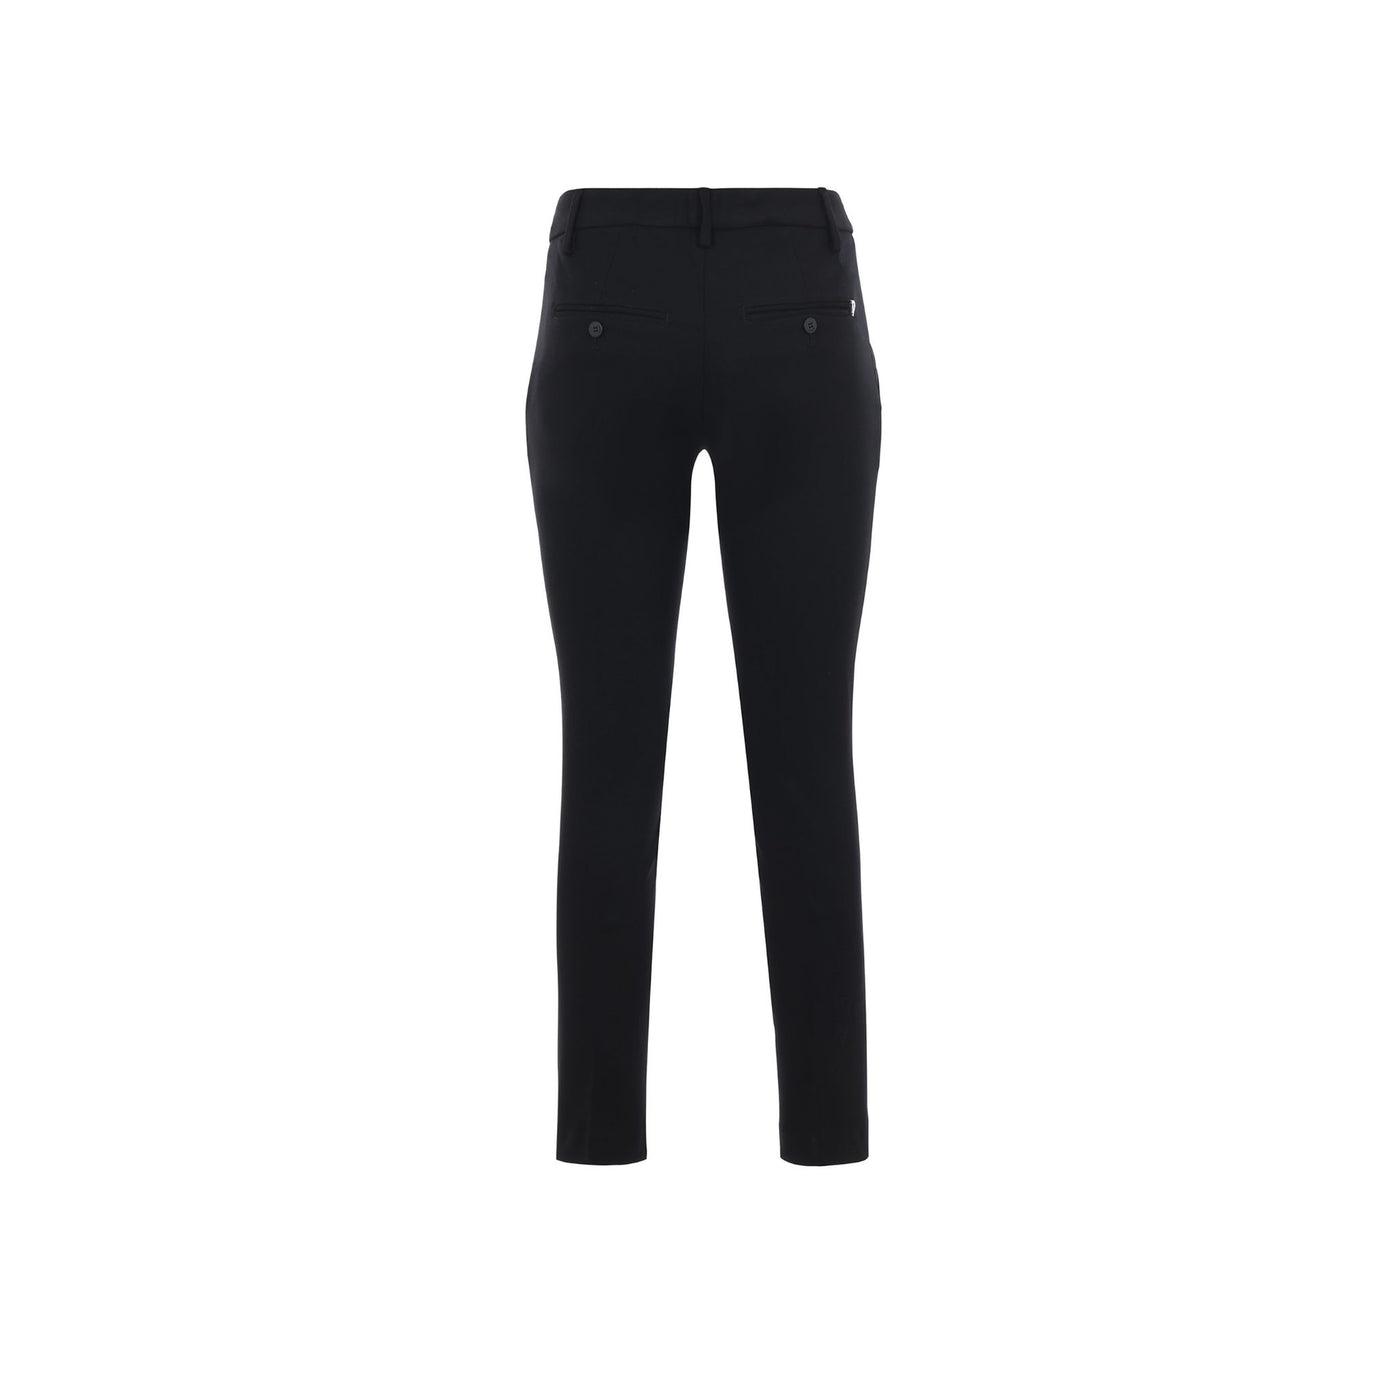 Women's regular trousers in solid color